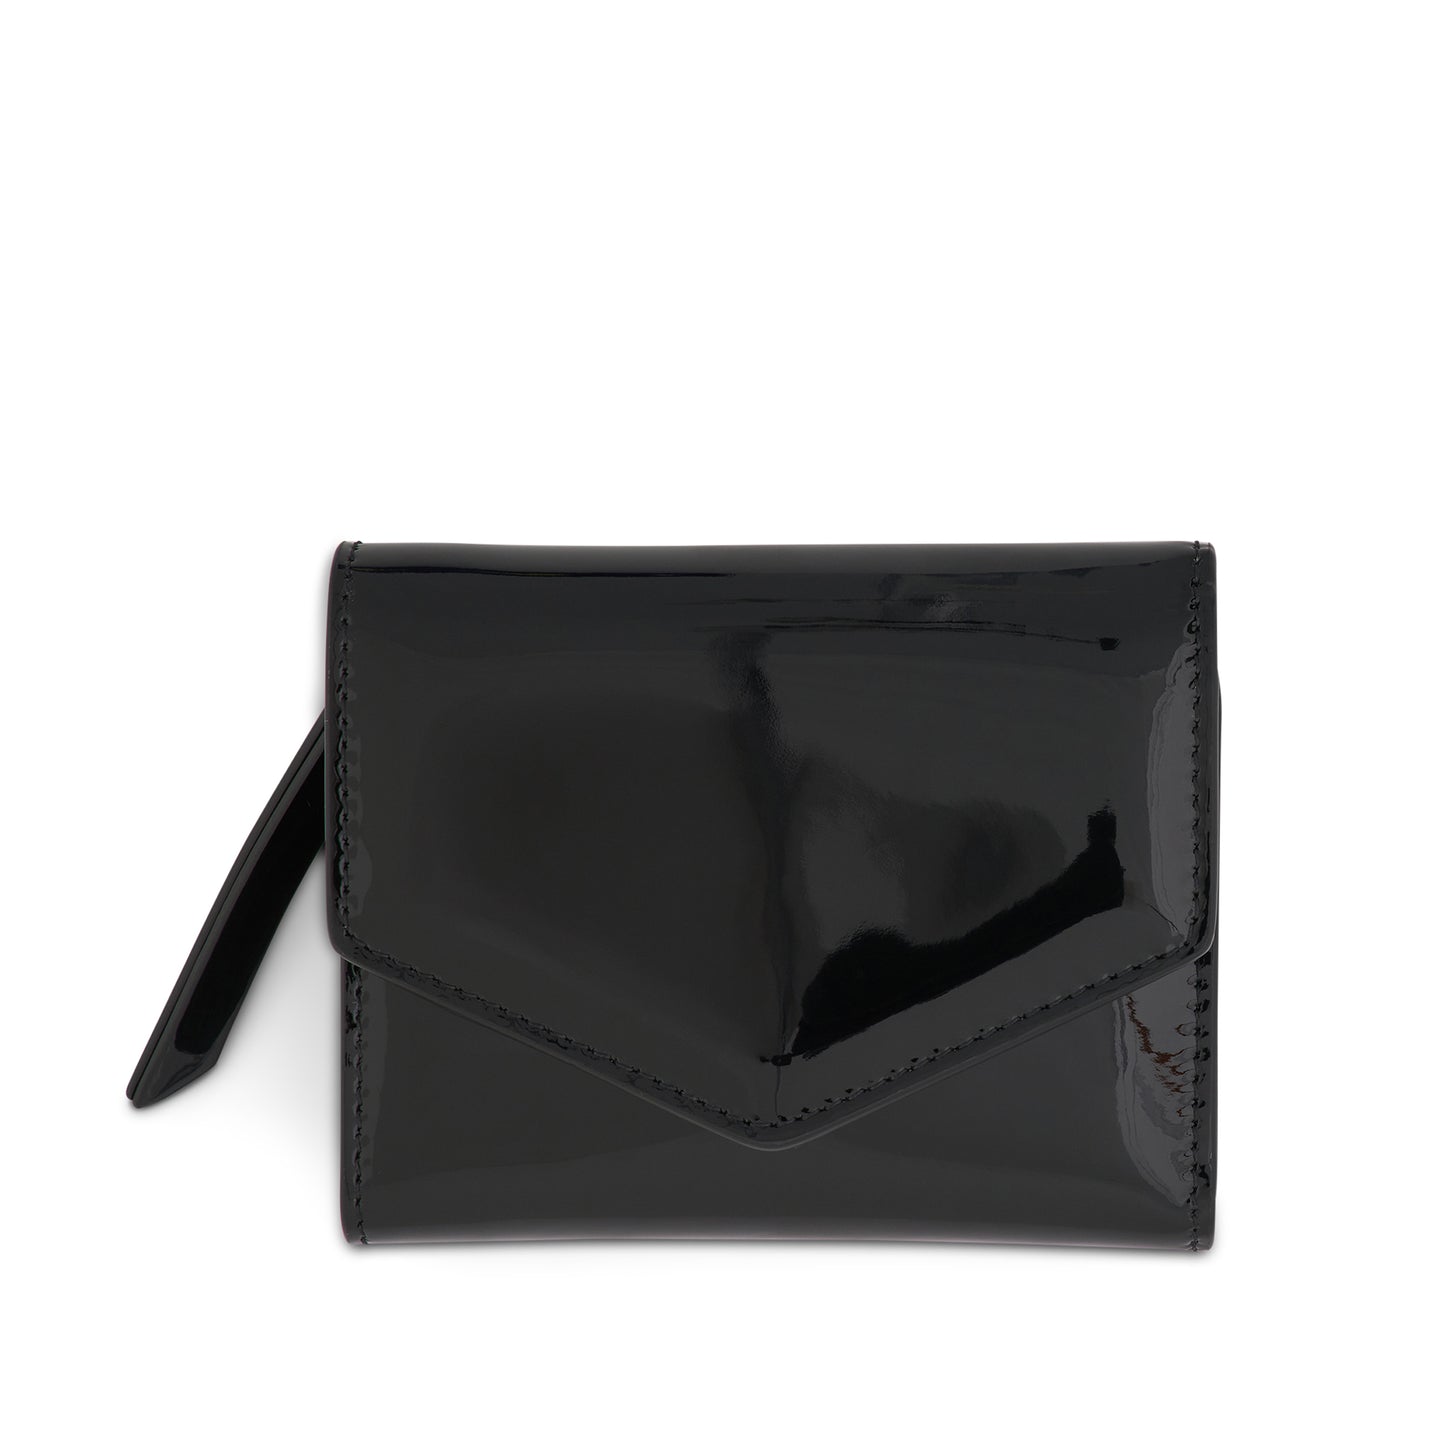 4 Stitch Patent Leather Envelope Wallet in Black